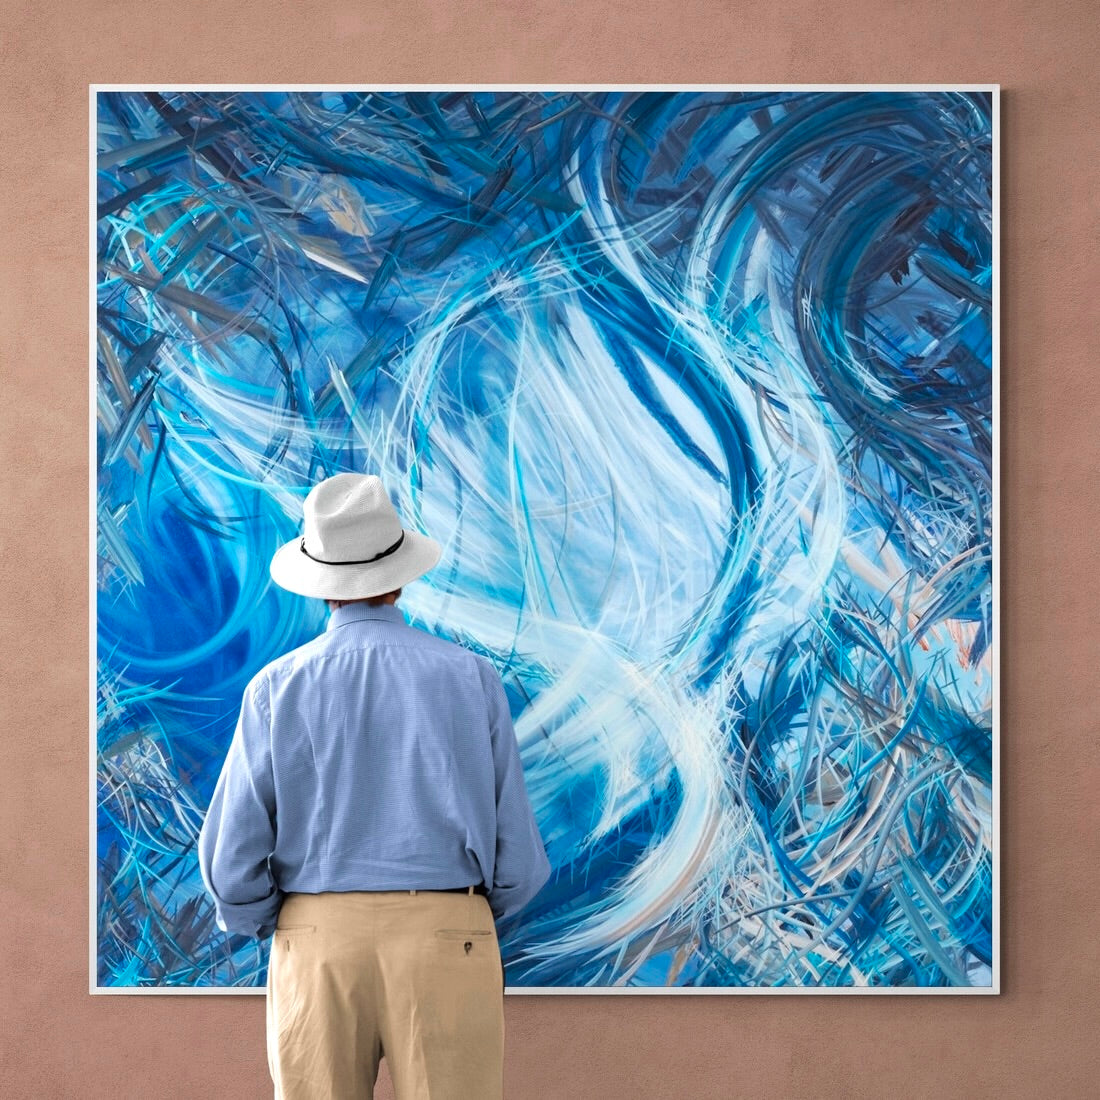 Michael Carini ocean themed abstract art for sale